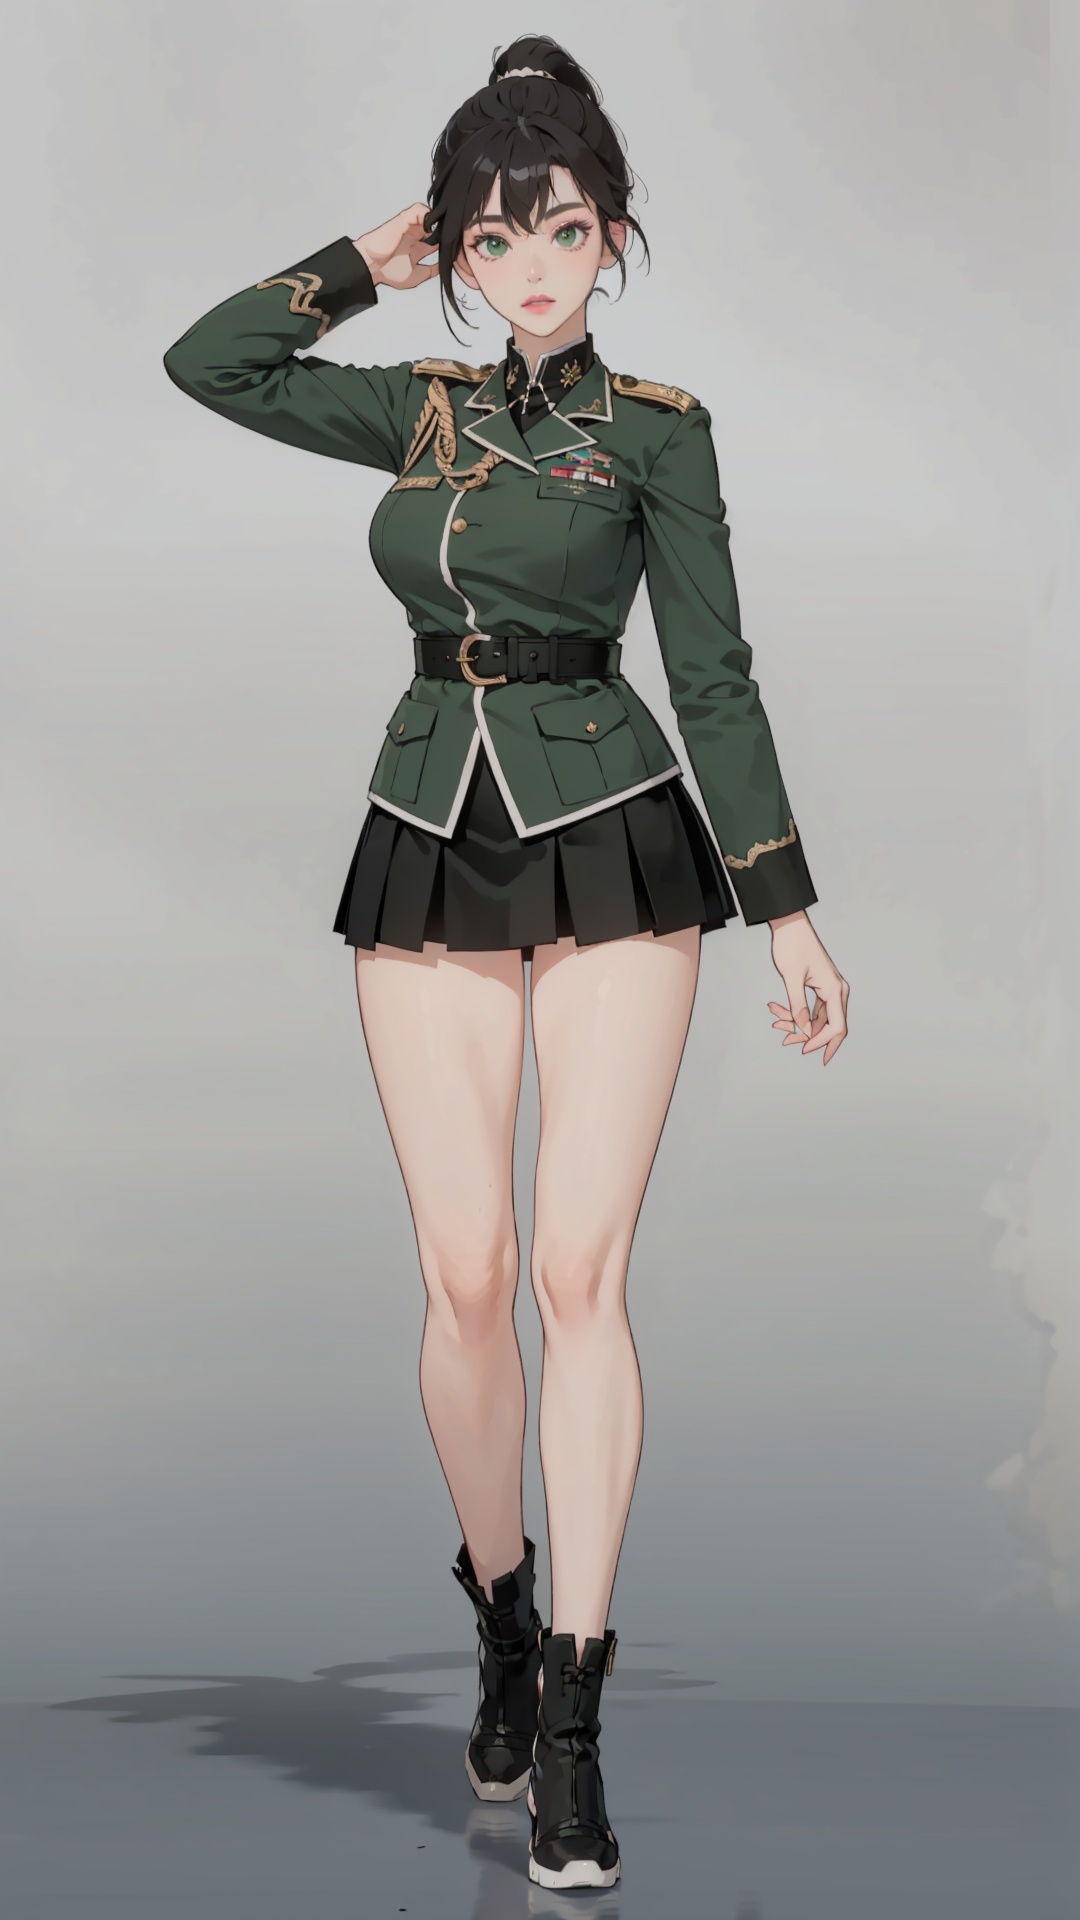 best quality, ultra high res, photoshoot, (photorealistic:1.4), 1girl, super big tits, ponytail, she is wearing (green:1.5) military uniform, lolita skirt, looking at viewer, facing front, wide angle, makeup, full body, stand, sexy, hot,shoushou